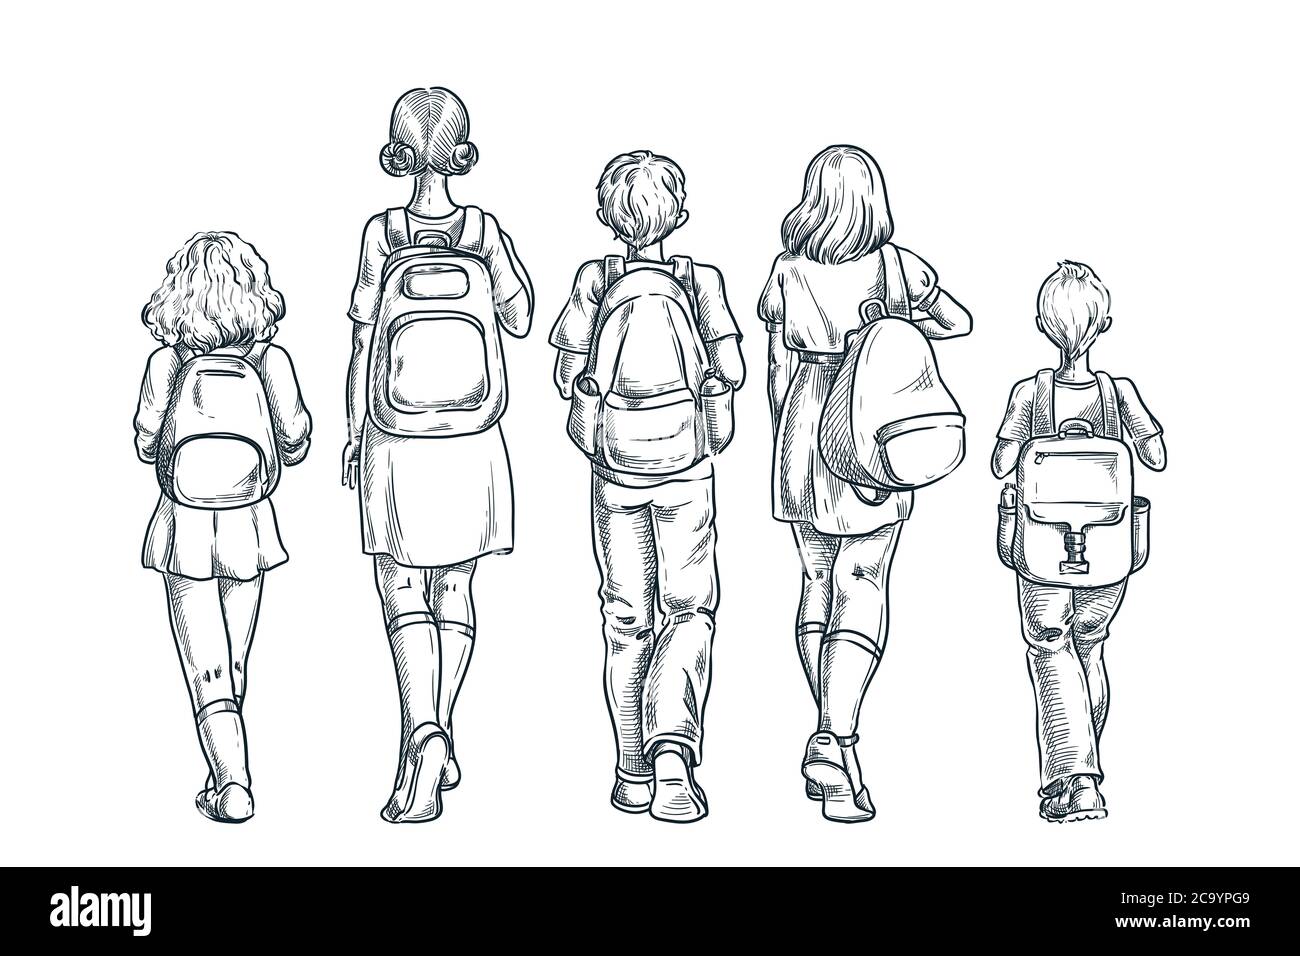 Back to school or first day at school concept. Kids schoolchildren with backpacks going to lessons. Vector hand drawn sketch back view illustration, i Stock Vector